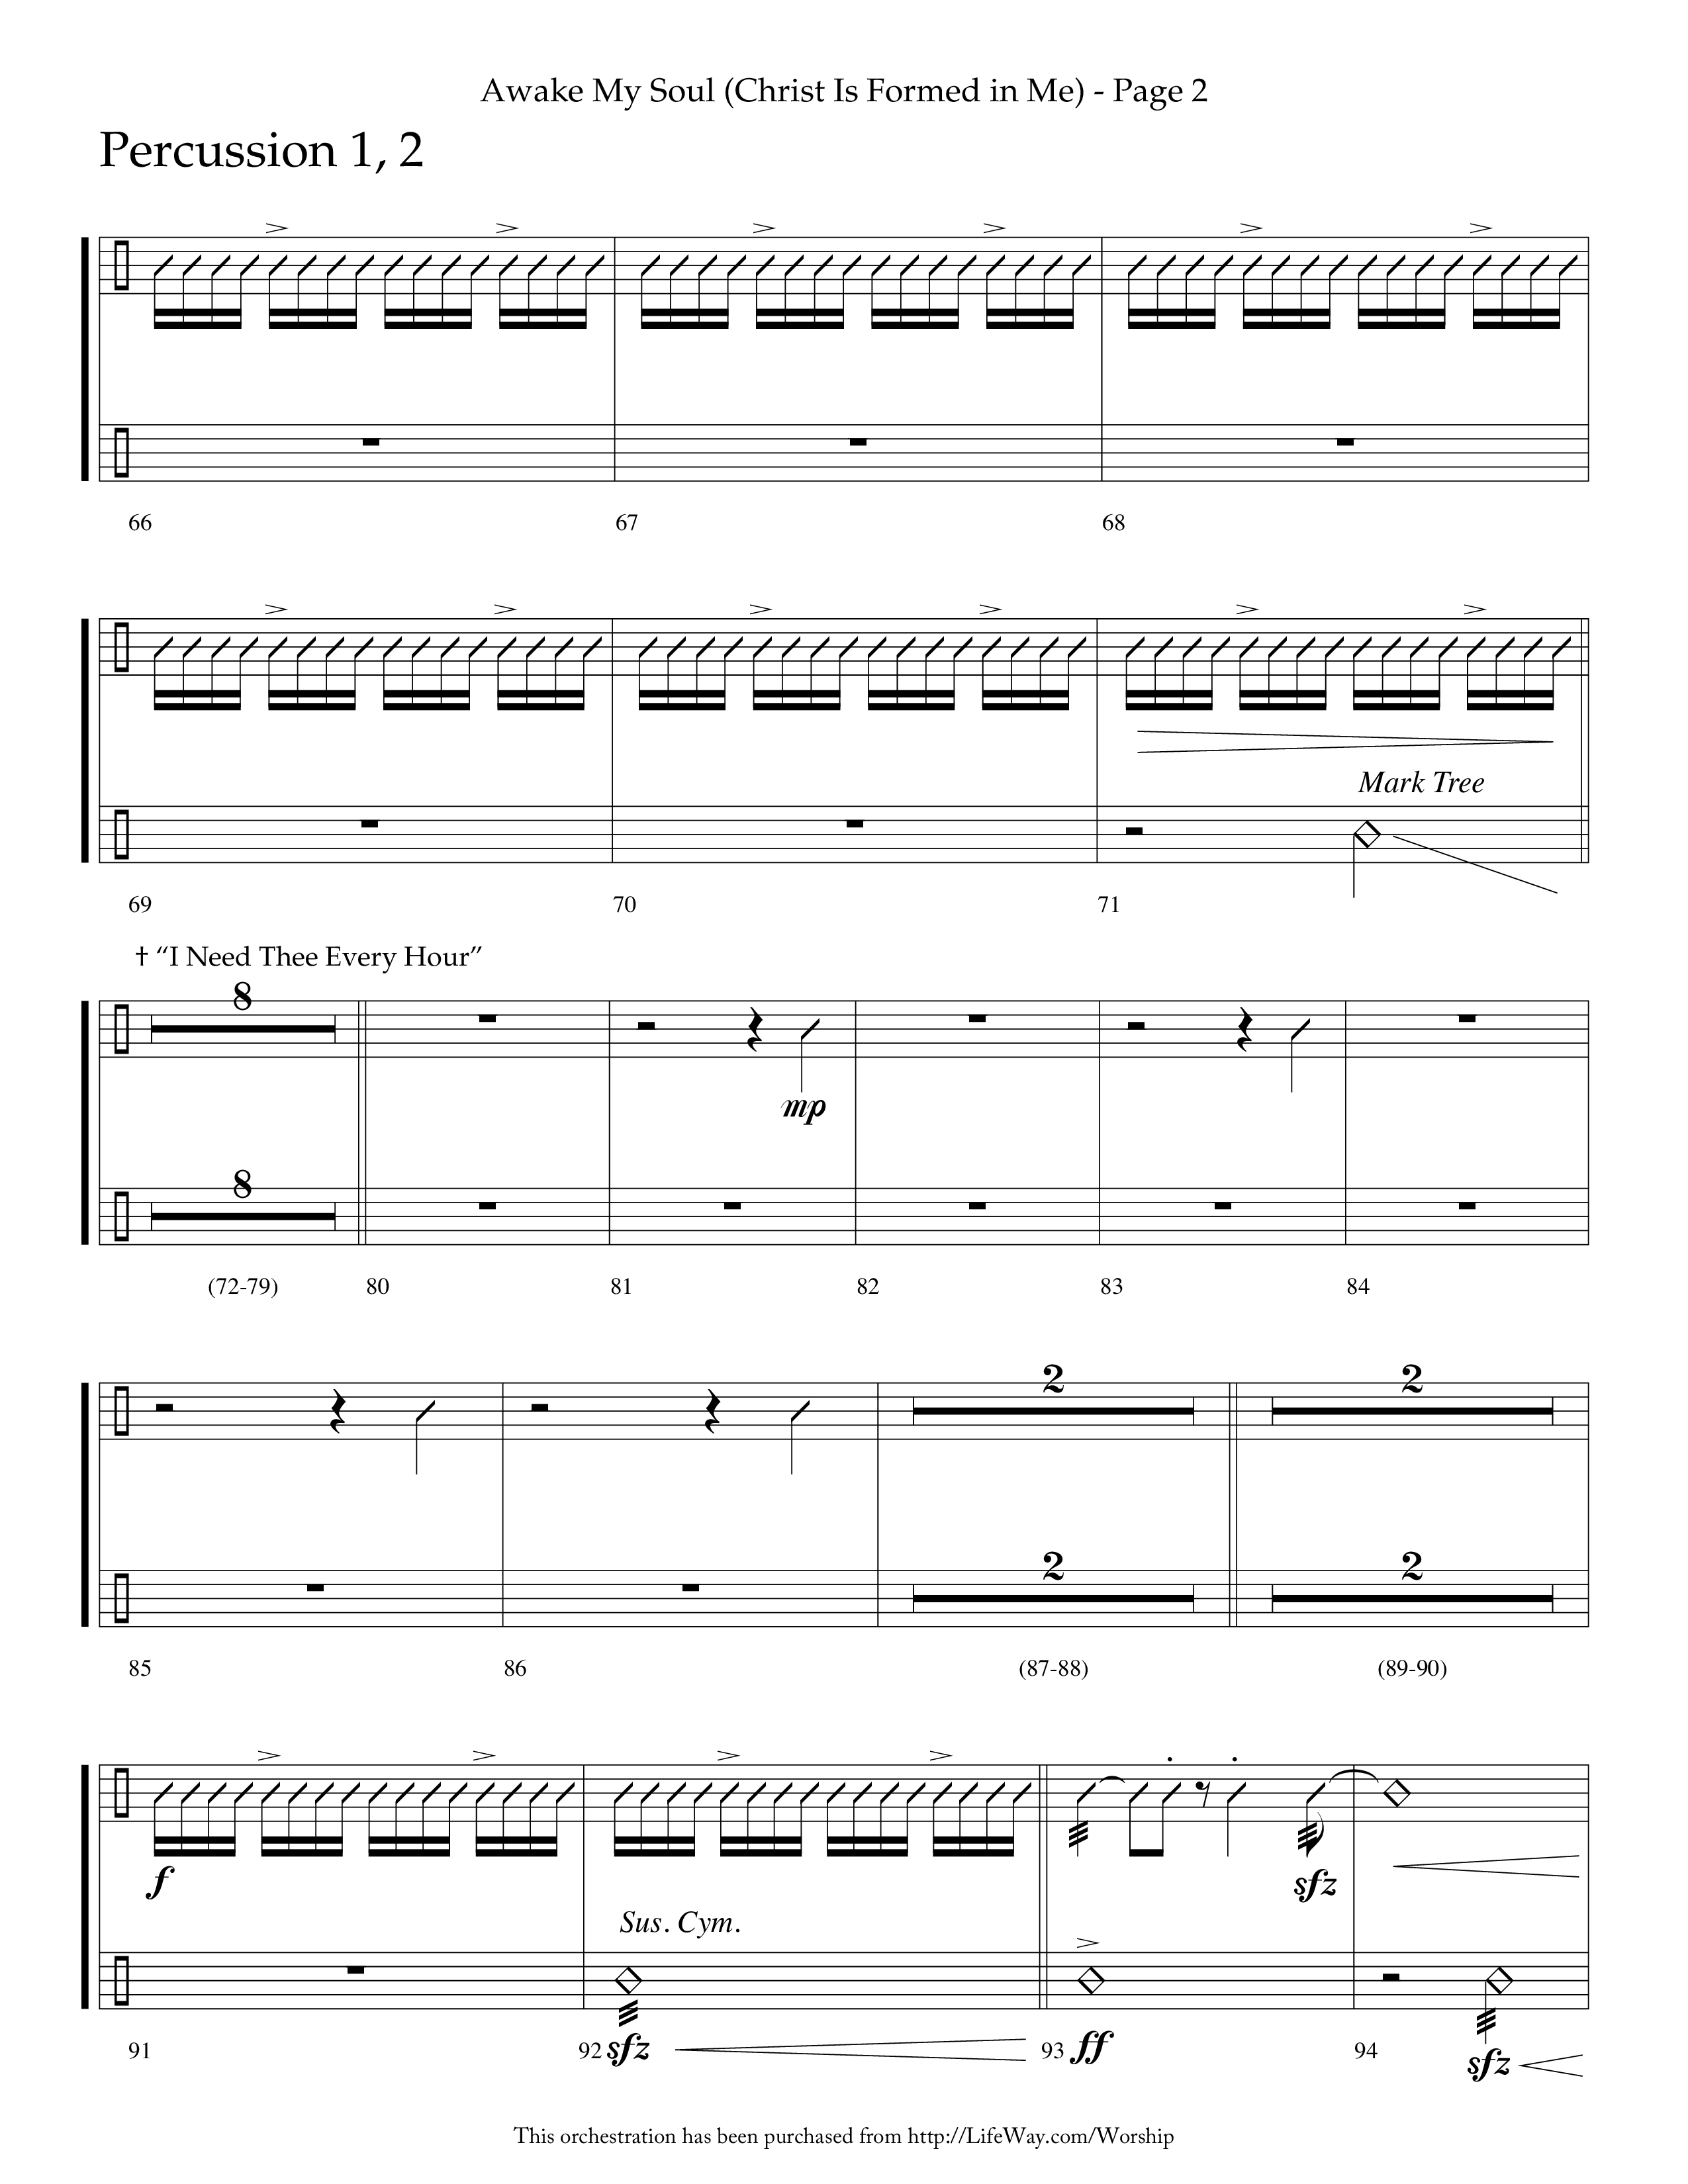 Awake My Soul (Christ Is Formed In Me) with I Need Thee Every Hour (Choral Anthem SATB) Percussion 1/2 (Lifeway Choral / Arr. Cliff Duren)